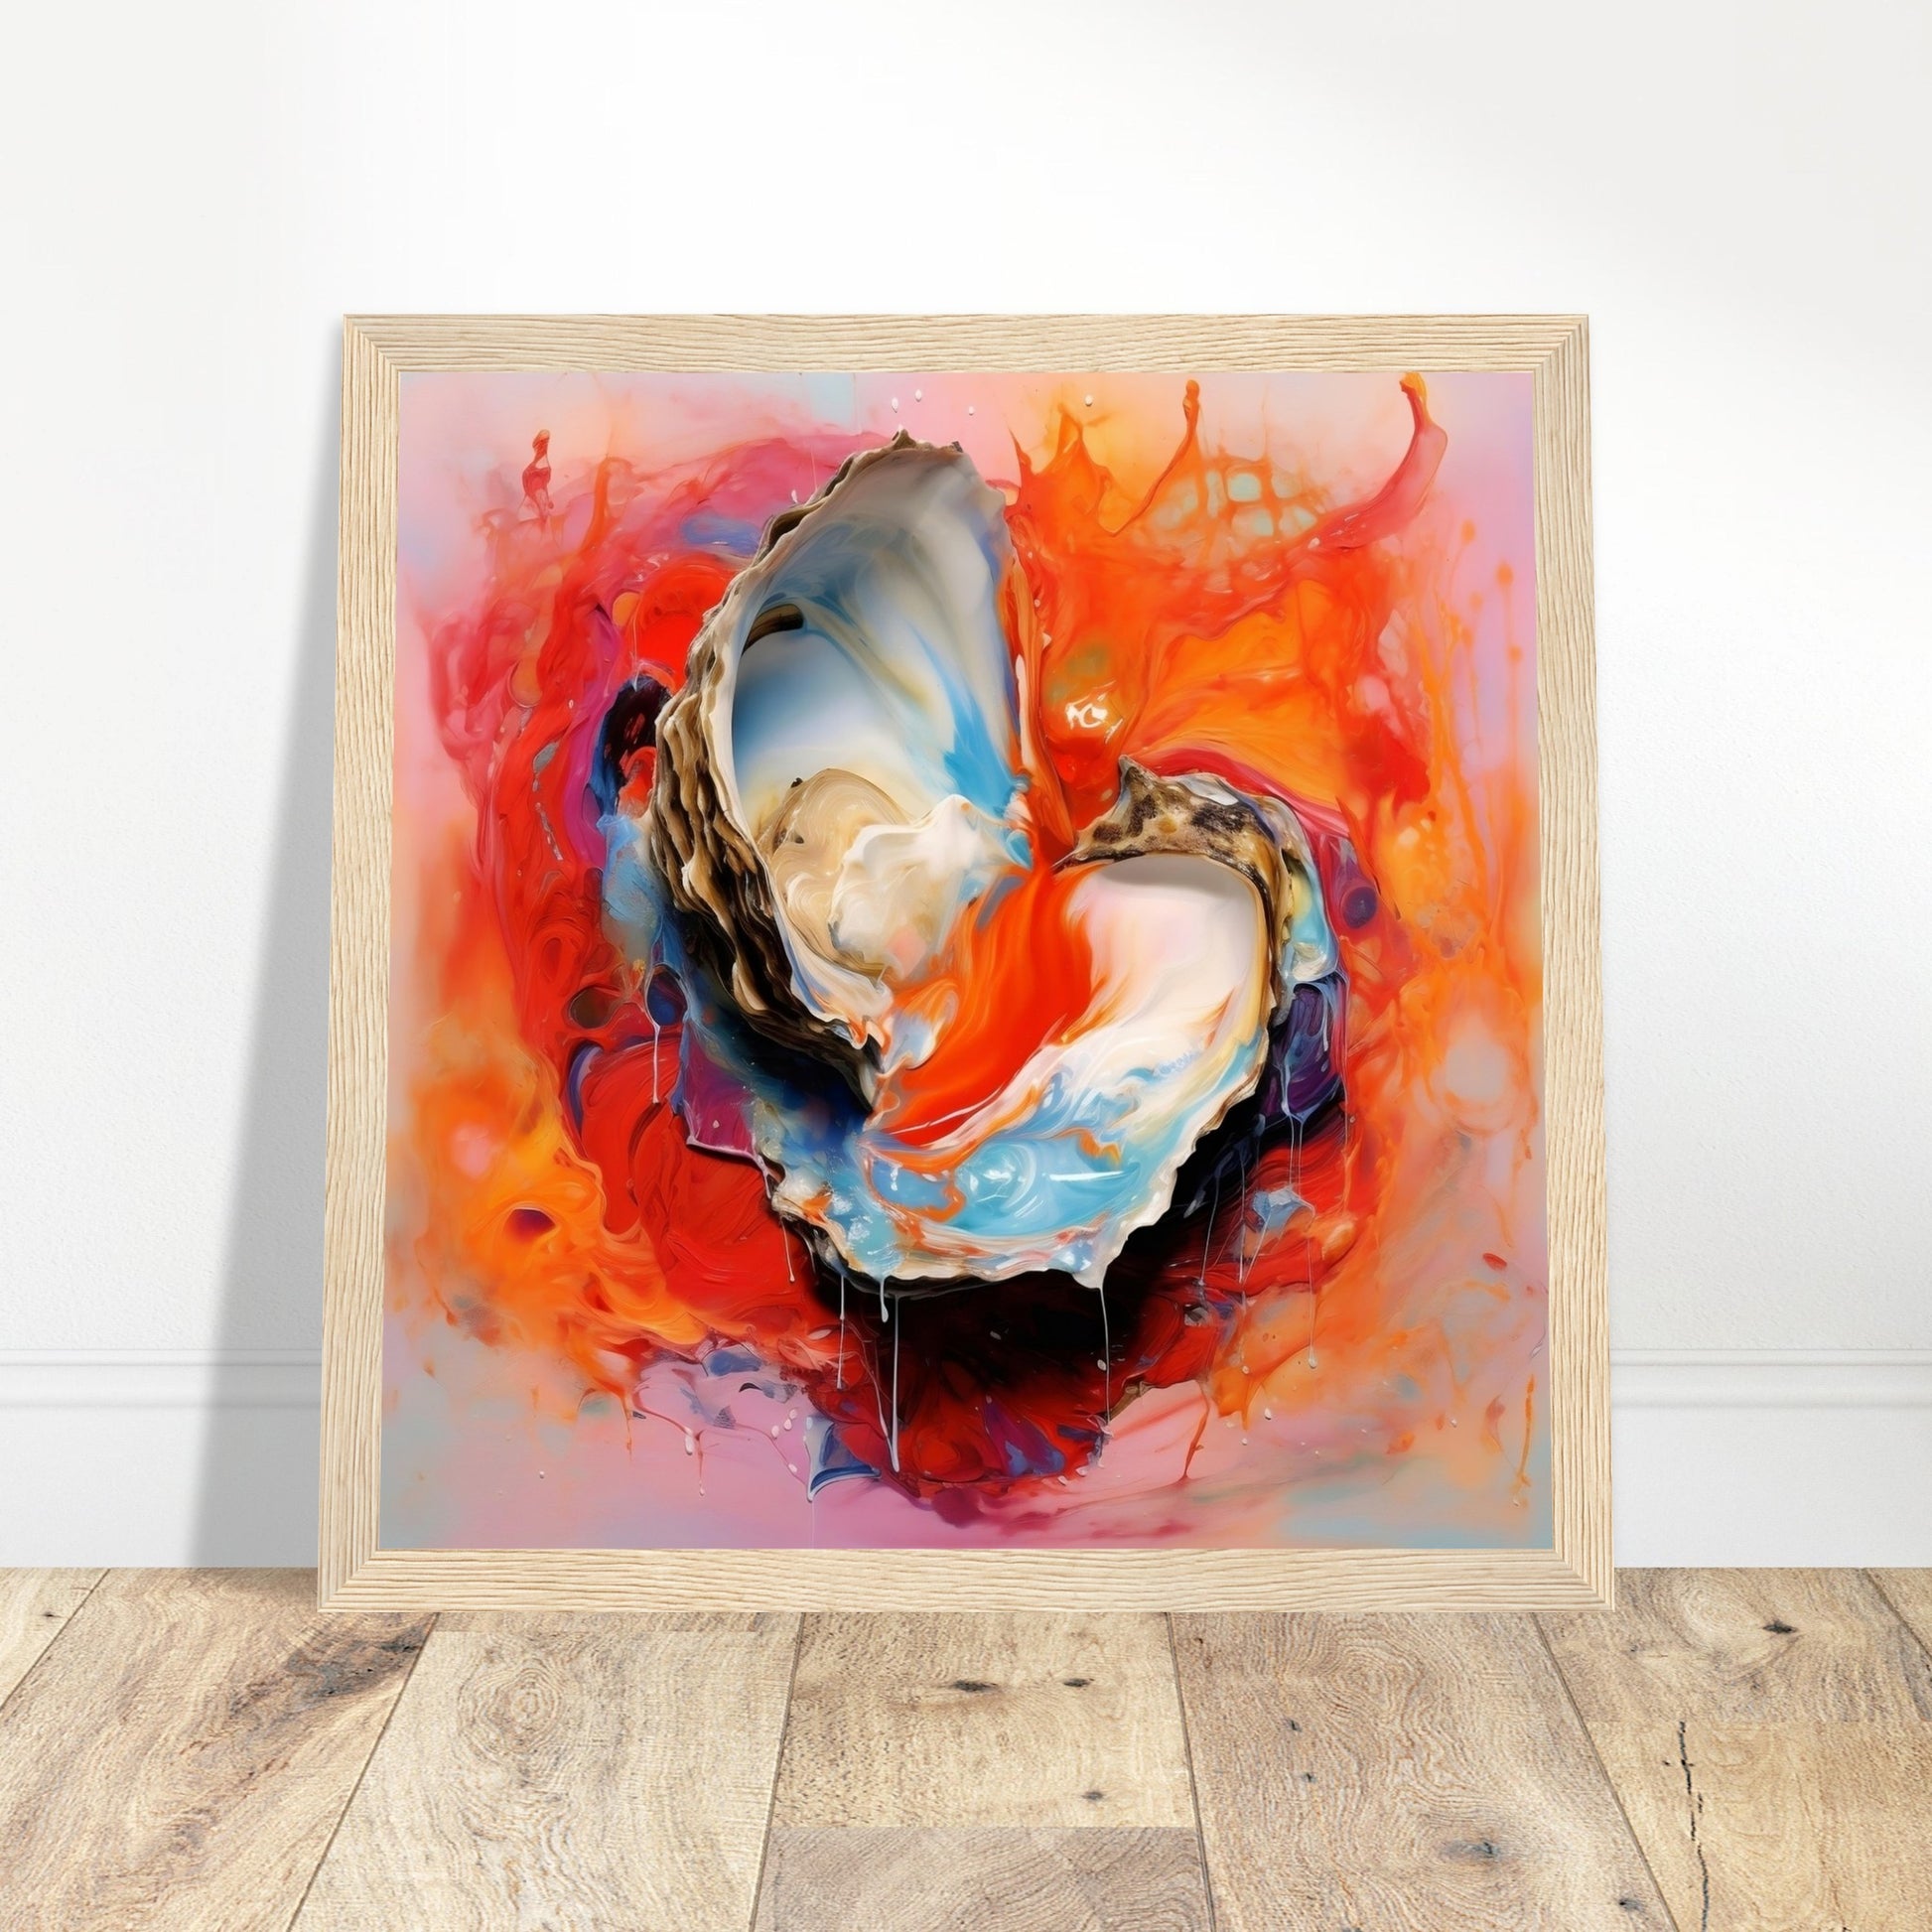 Exclusive Oyster Sea Artwork #5 - Print Room Ltd No Frame Selected 50x50 cm / 20x20"